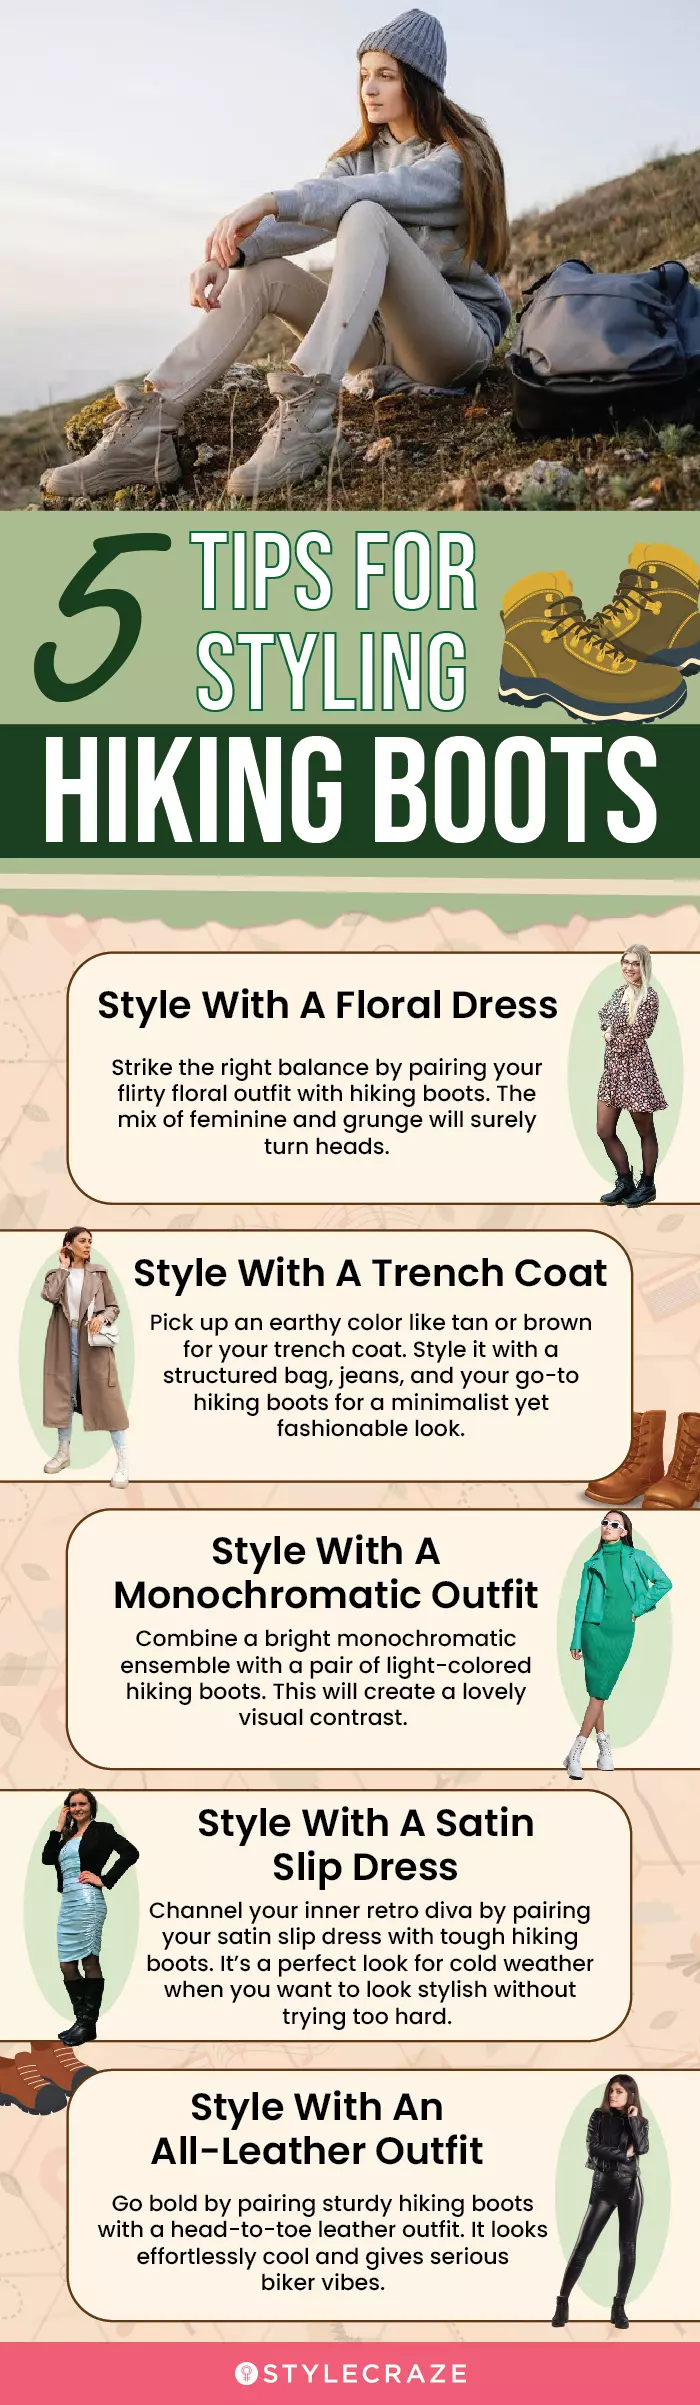 5 Tips On How To Style Hiking Boots (infographic)